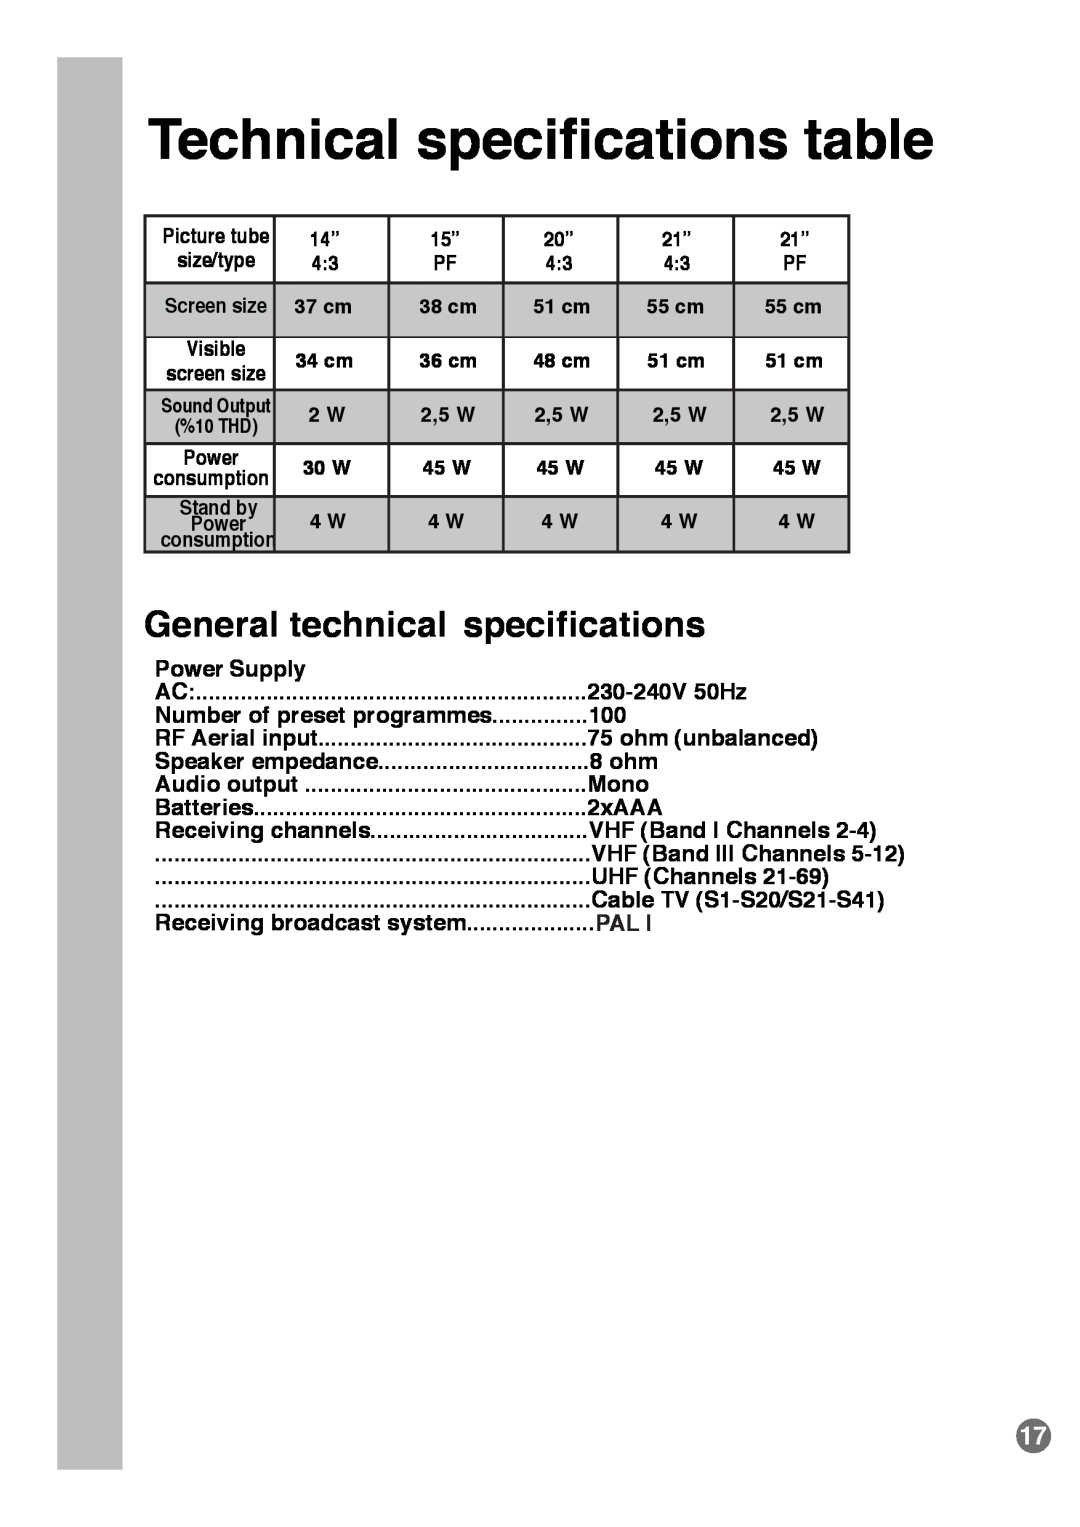 Beko E1 Technical specifications table, General technical specifications, Power Supply, 230-240V 50Hz, RF Aerial input 